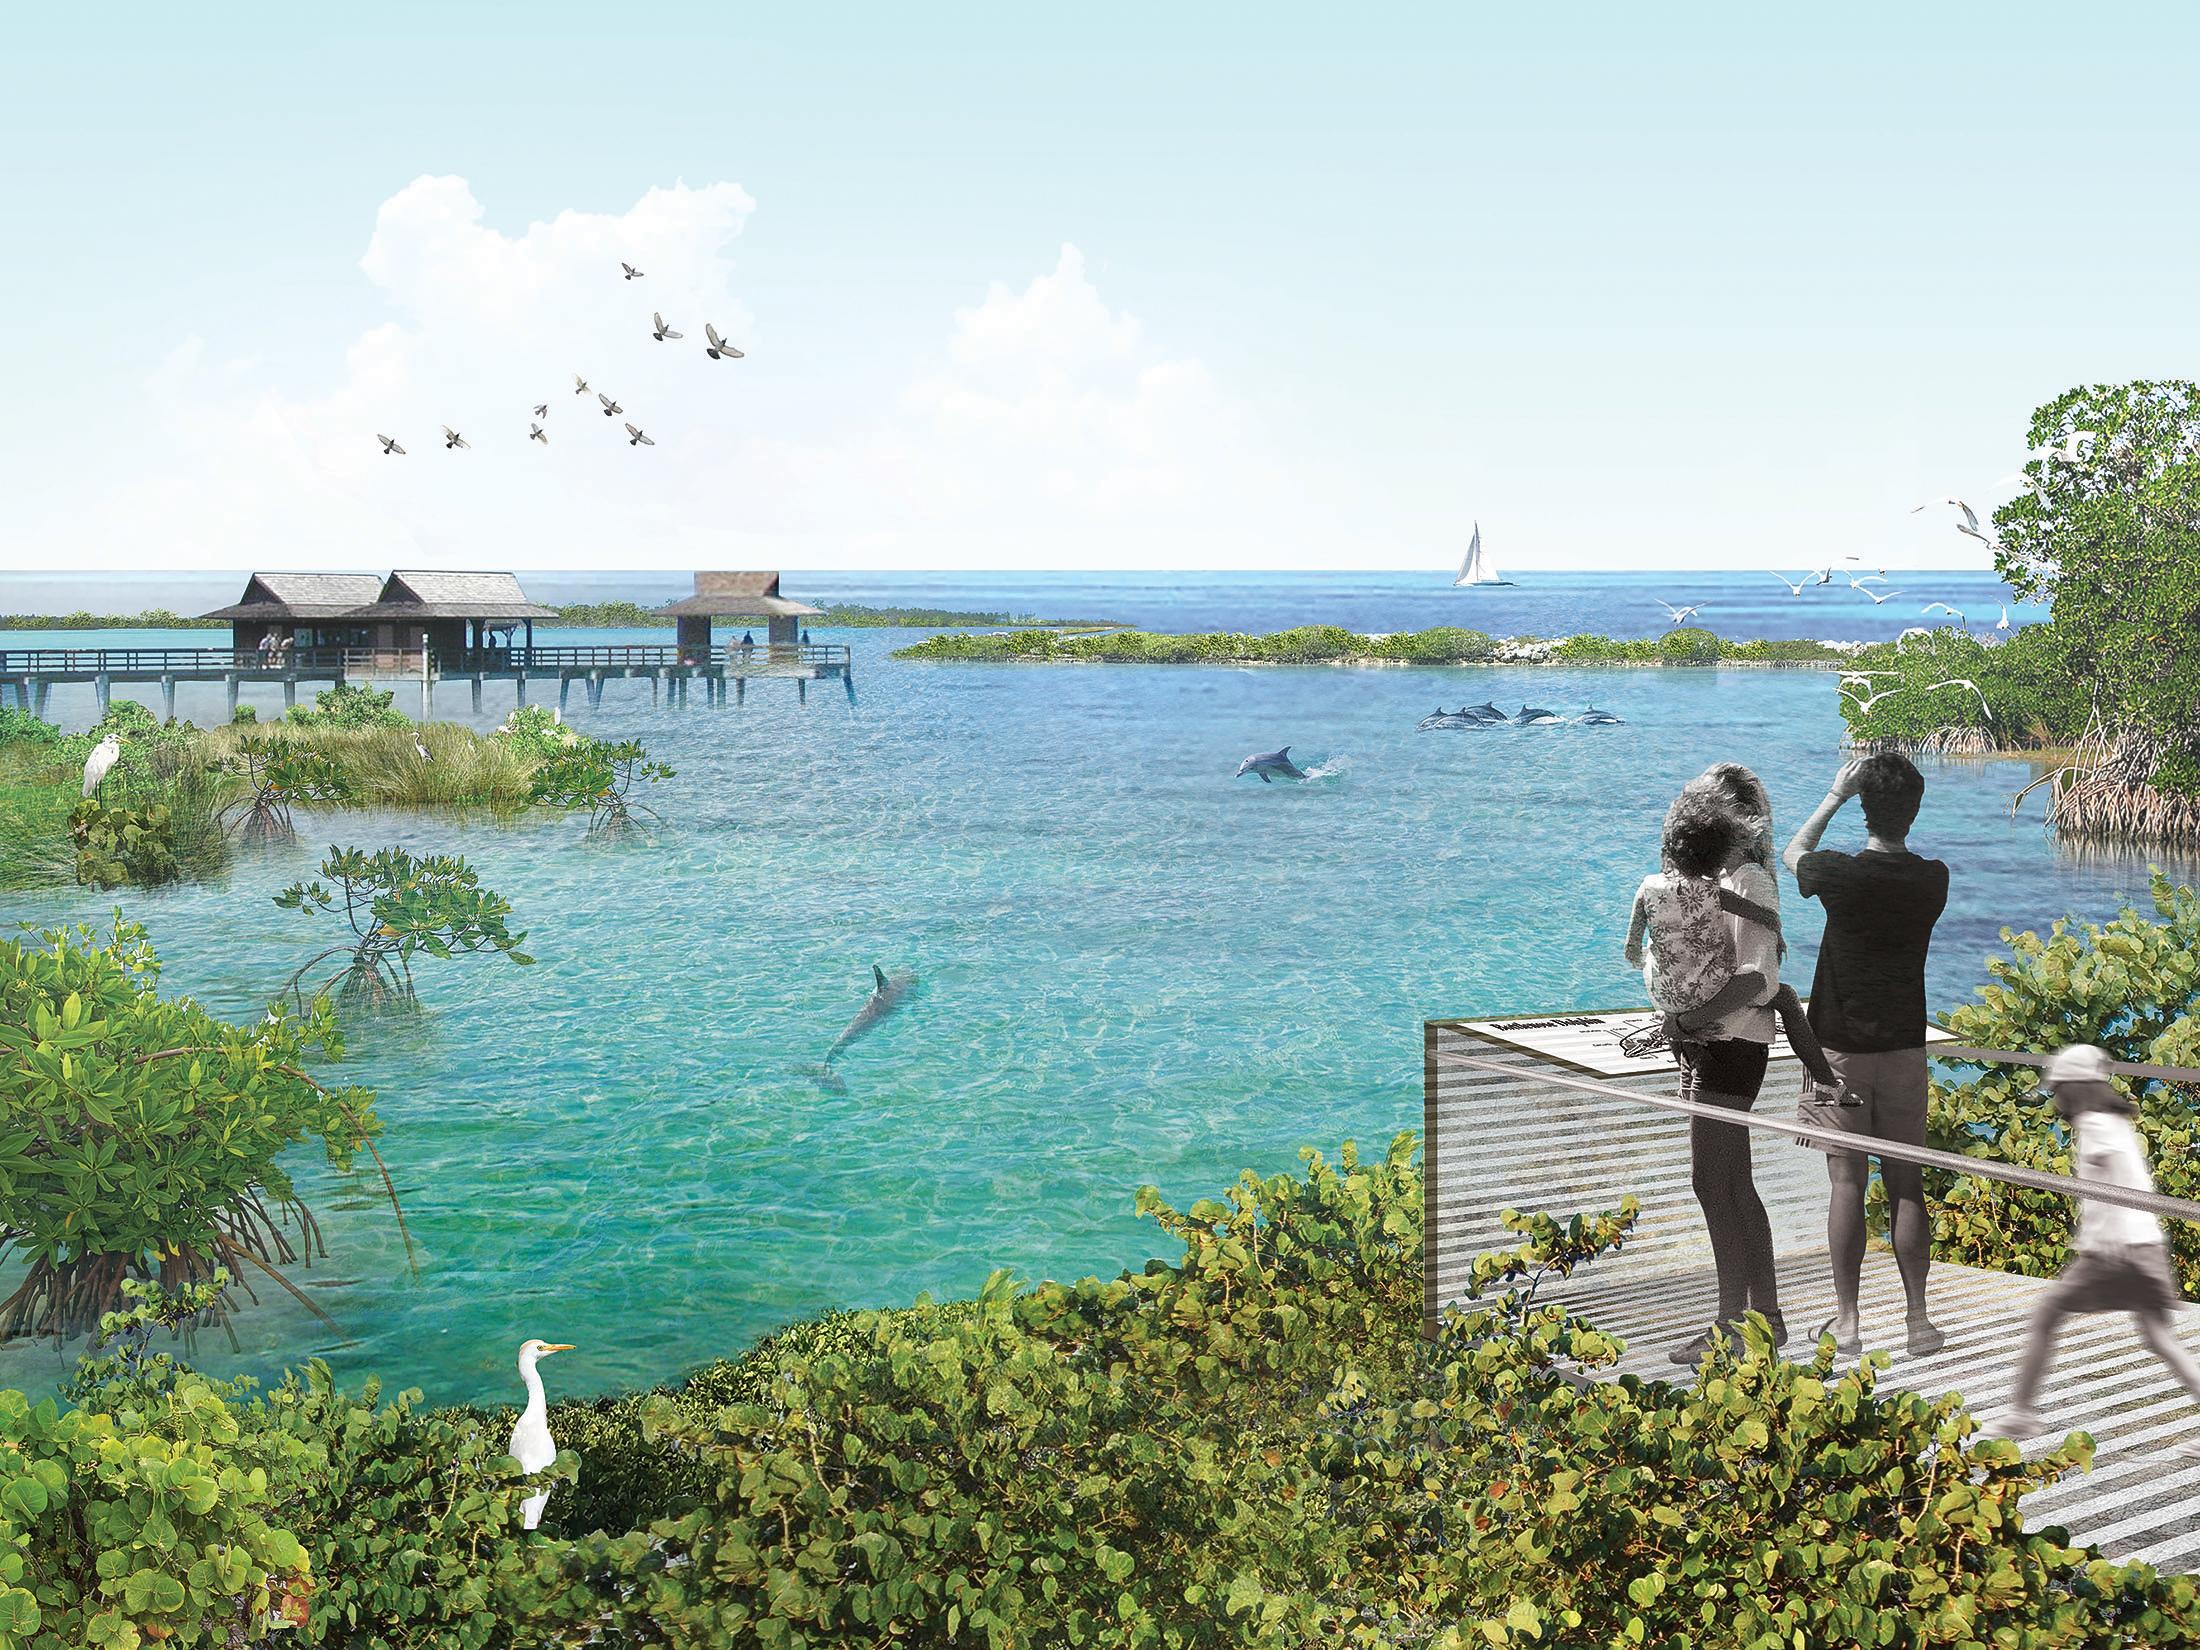 An artistic rendering of the National Aquarium’s Dolphin Sanctuary in Florida